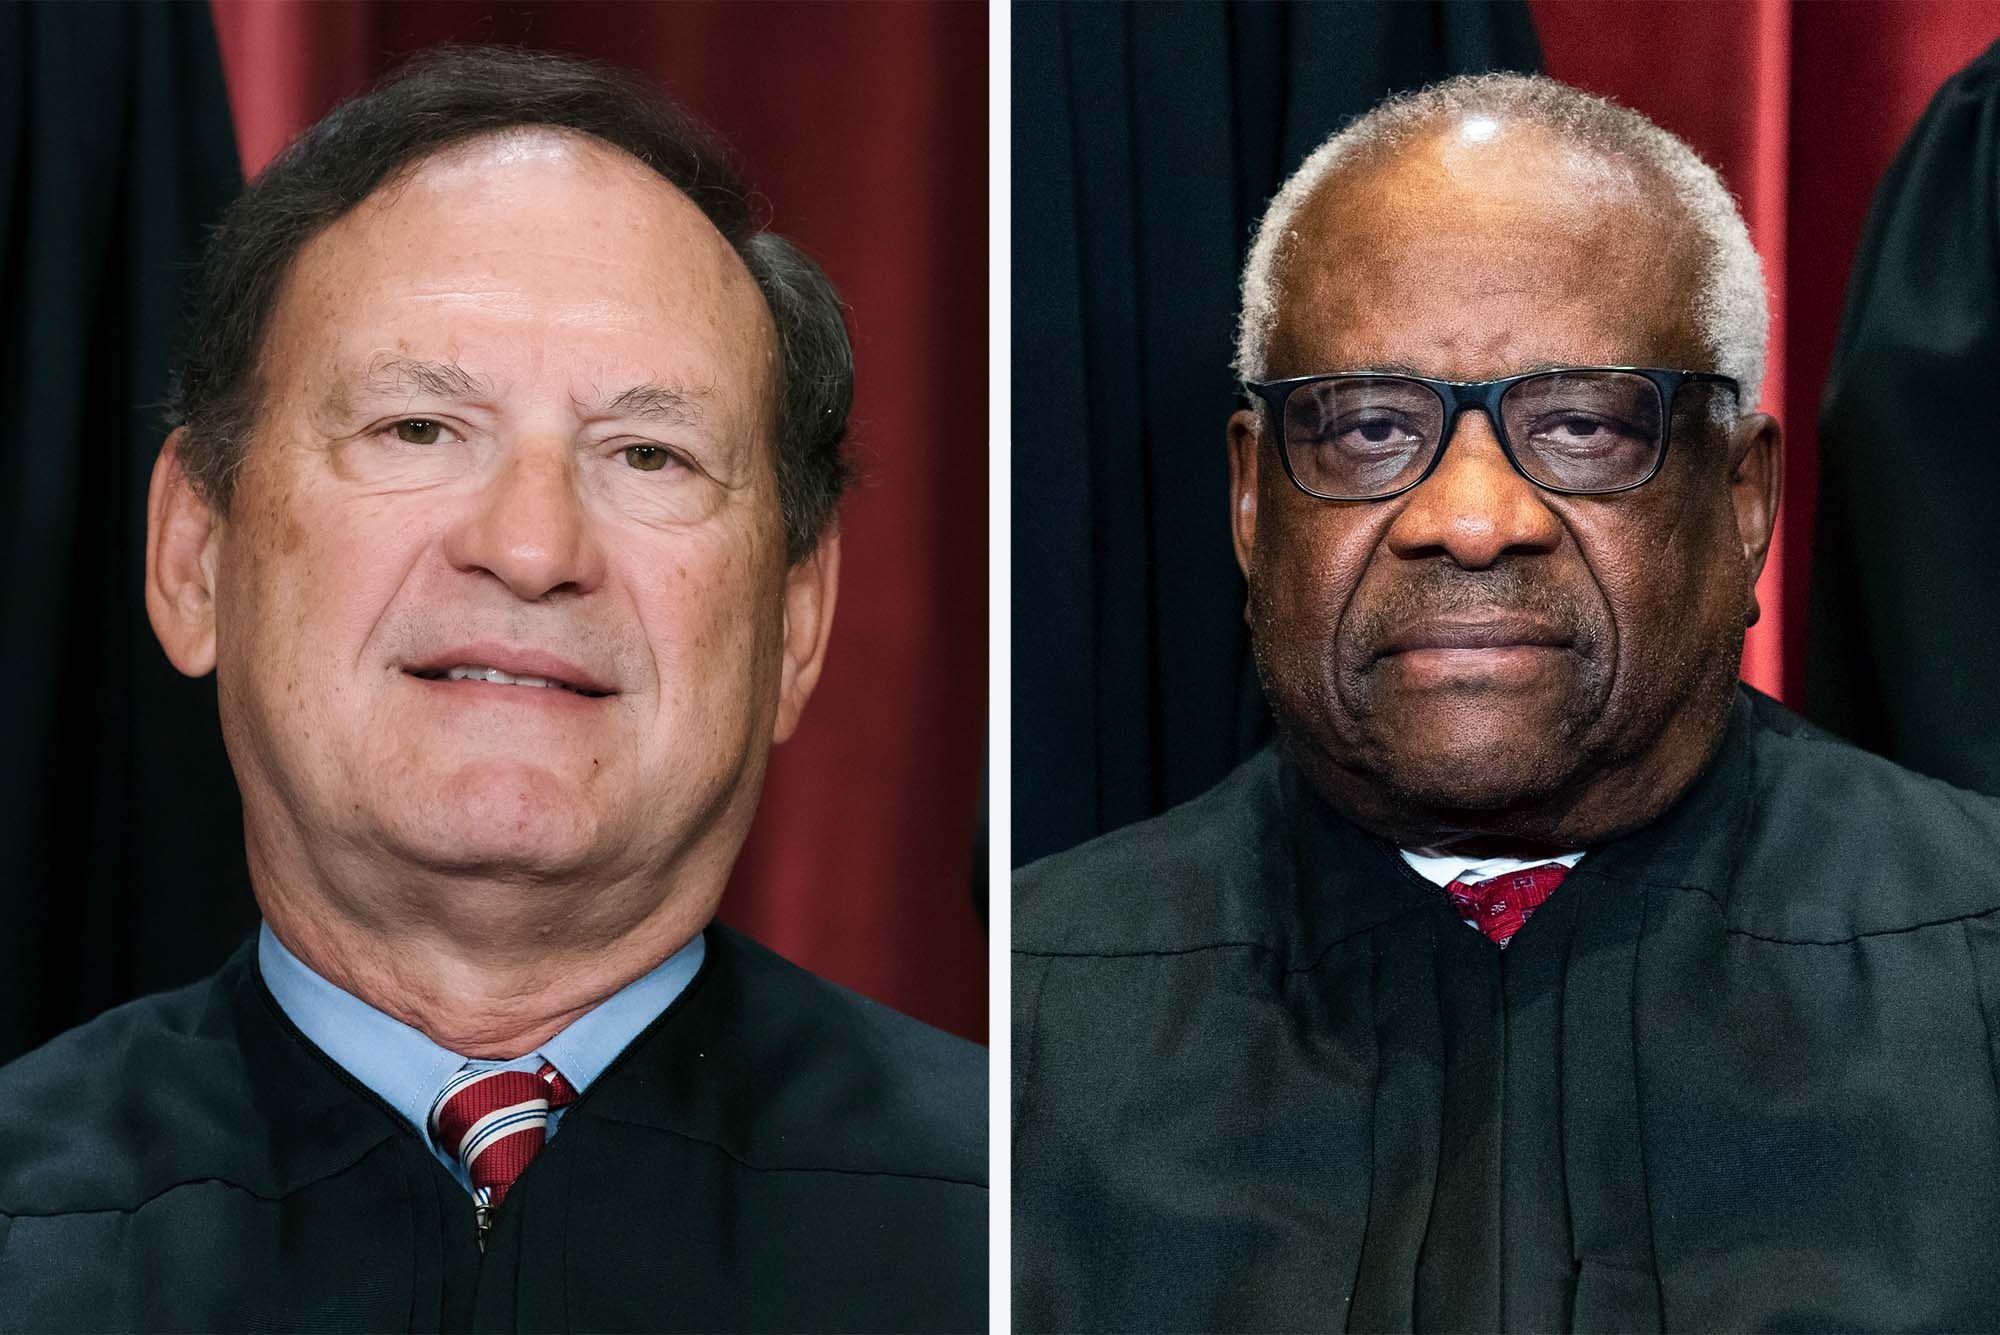 Composite image of Samuel Alito, a white man wearing judge robes smiling for a formal portrait, next to Clarence Thomas, a black man also in judge robes with a serious look on his face